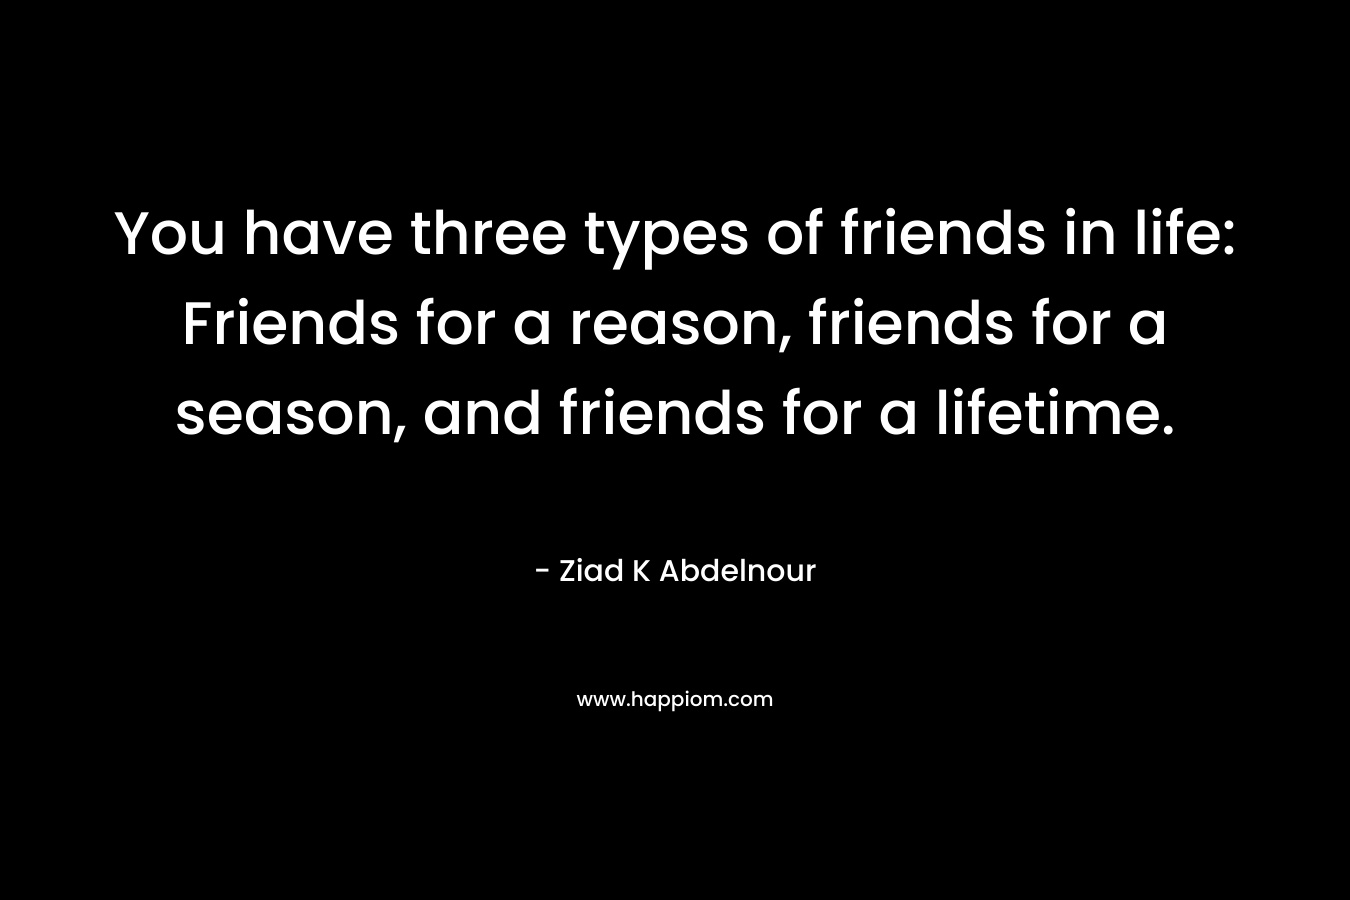 You have three types of friends in life: Friends for a reason, friends for a season, and friends for a lifetime.